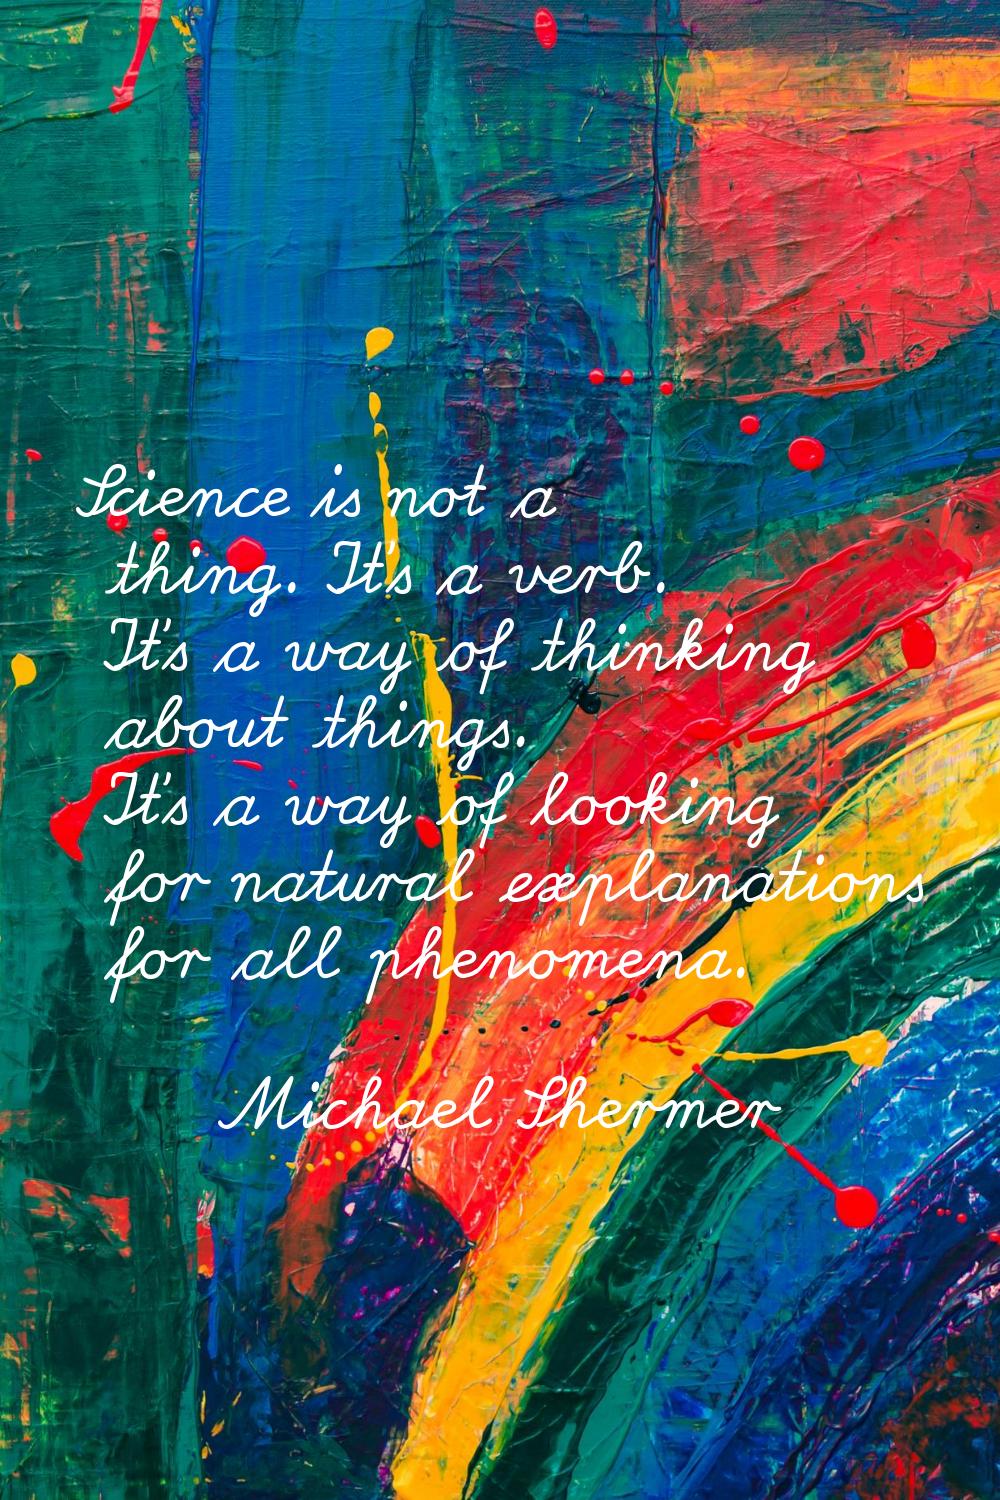 Science is not a thing. It's a verb. It's a way of thinking about things. It's a way of looking for